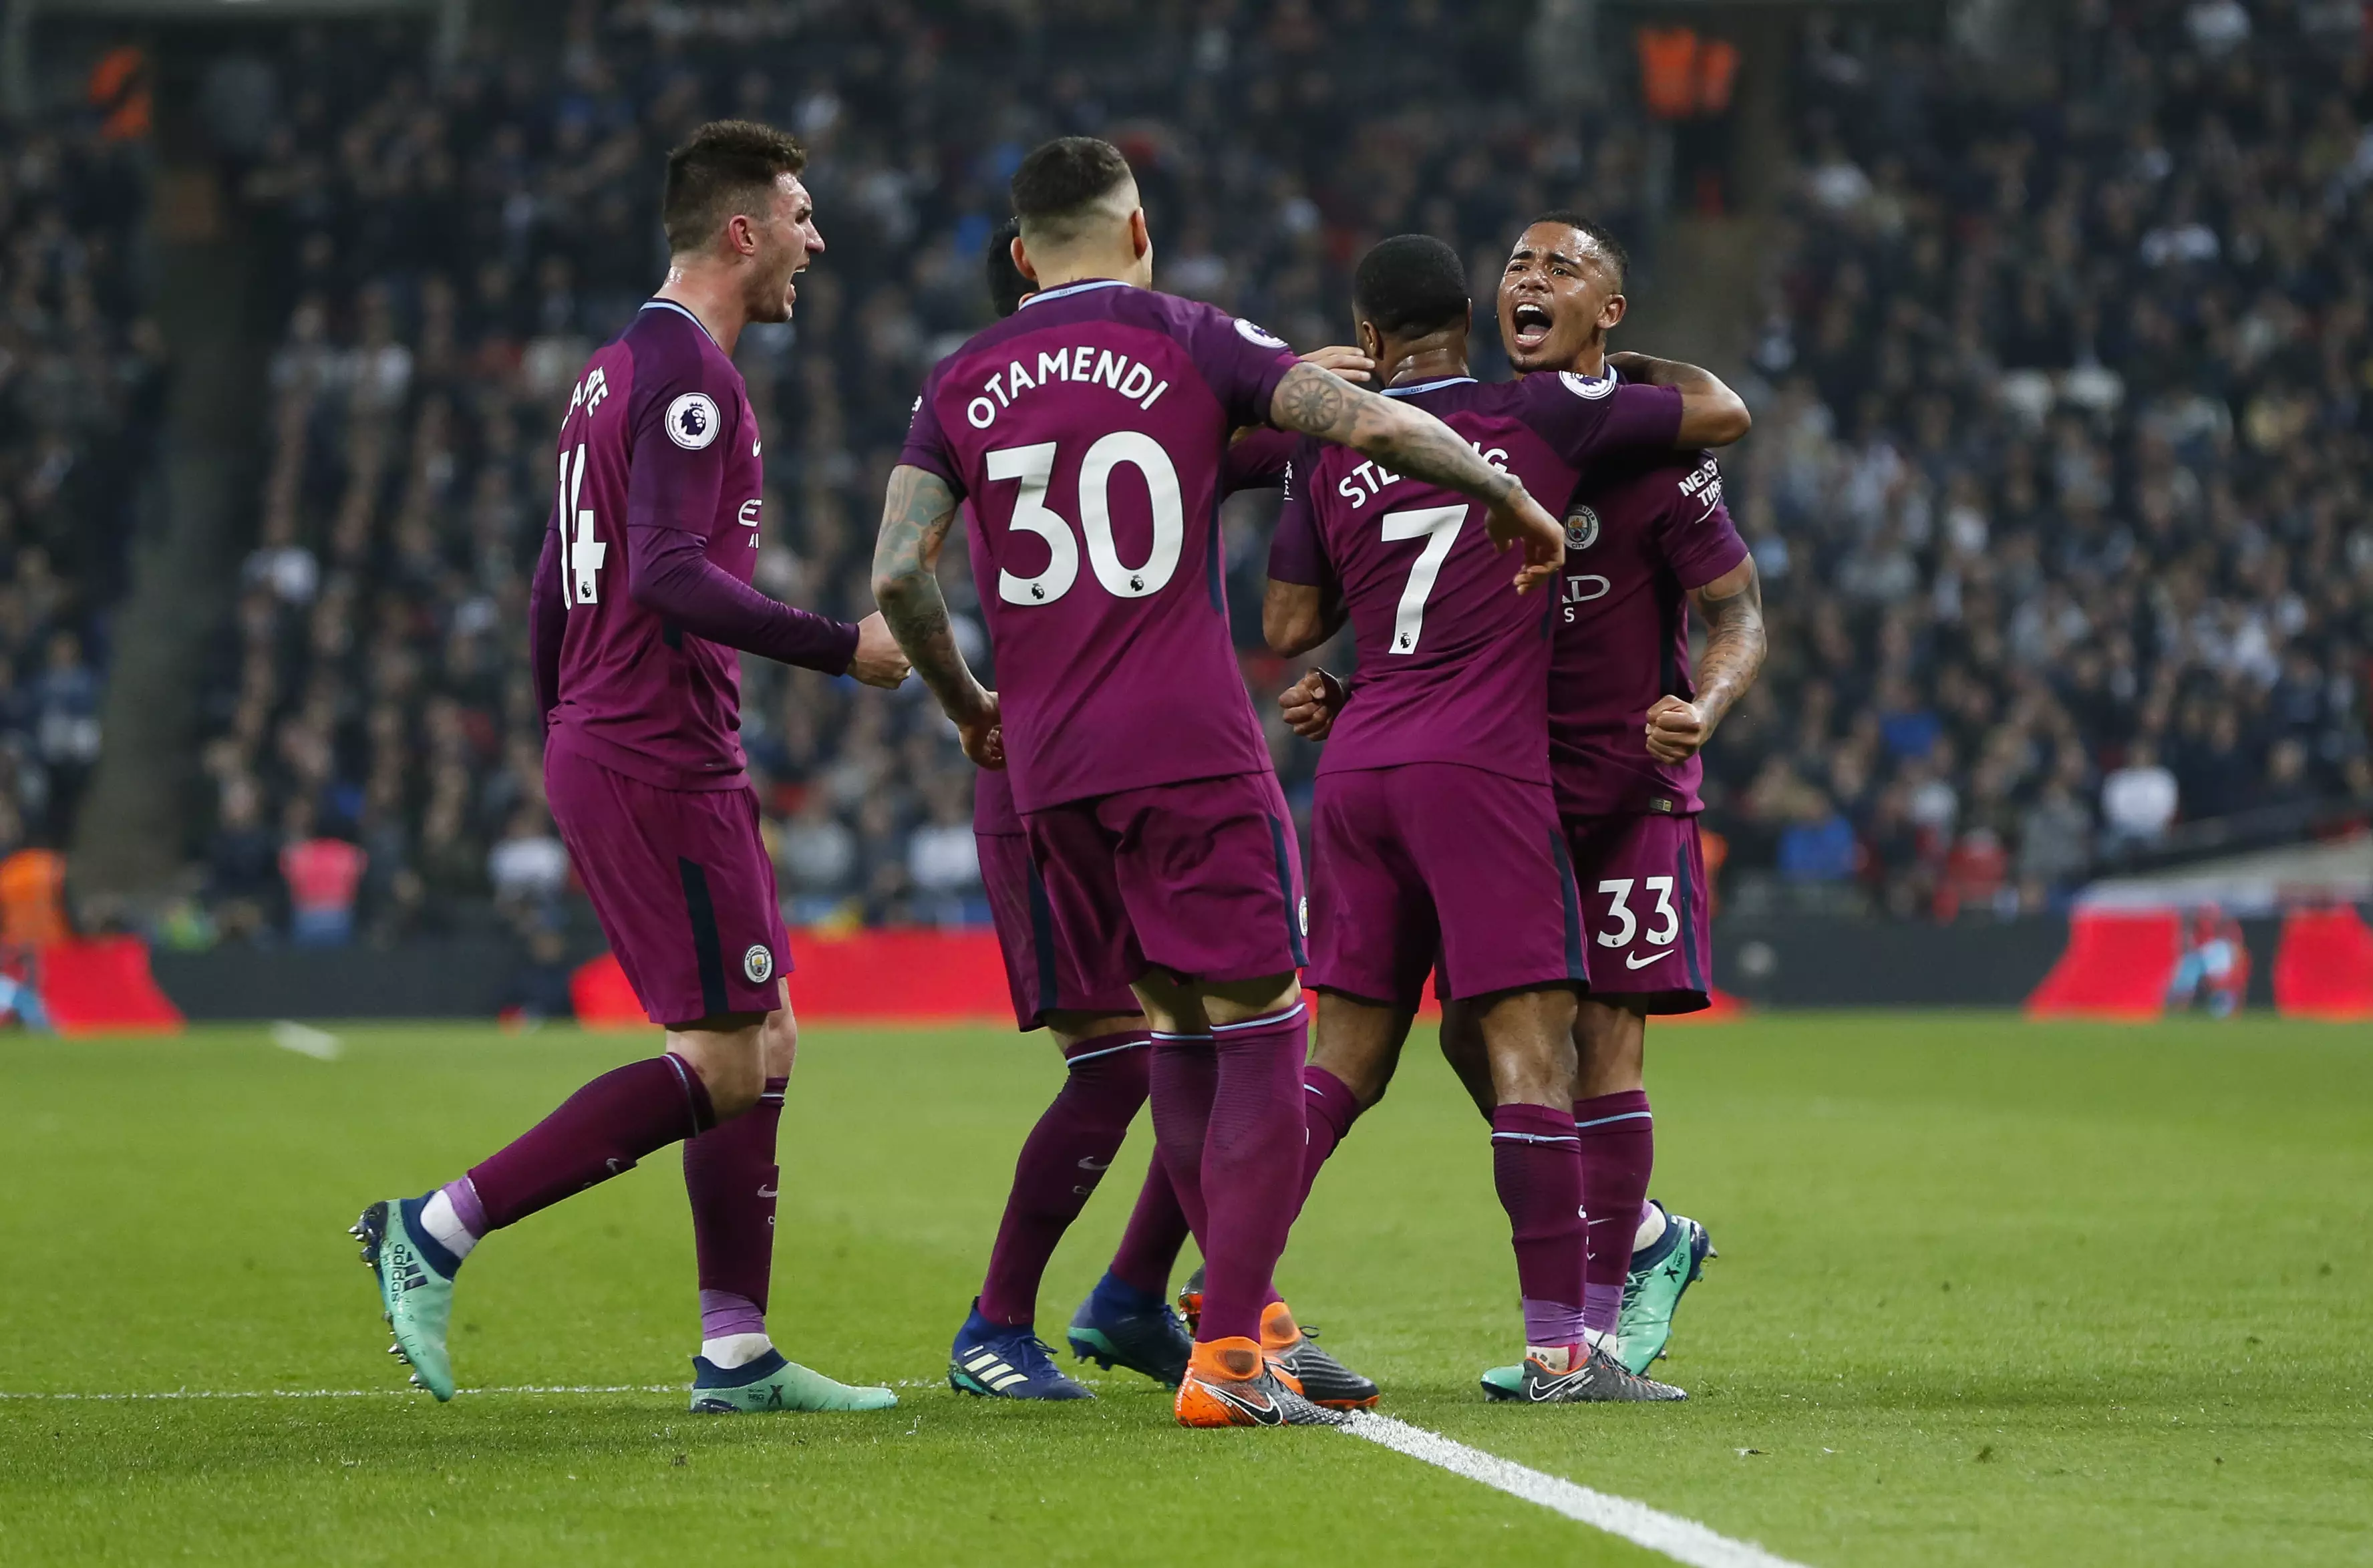 City players celebrate against Spurs. Image: PA Images